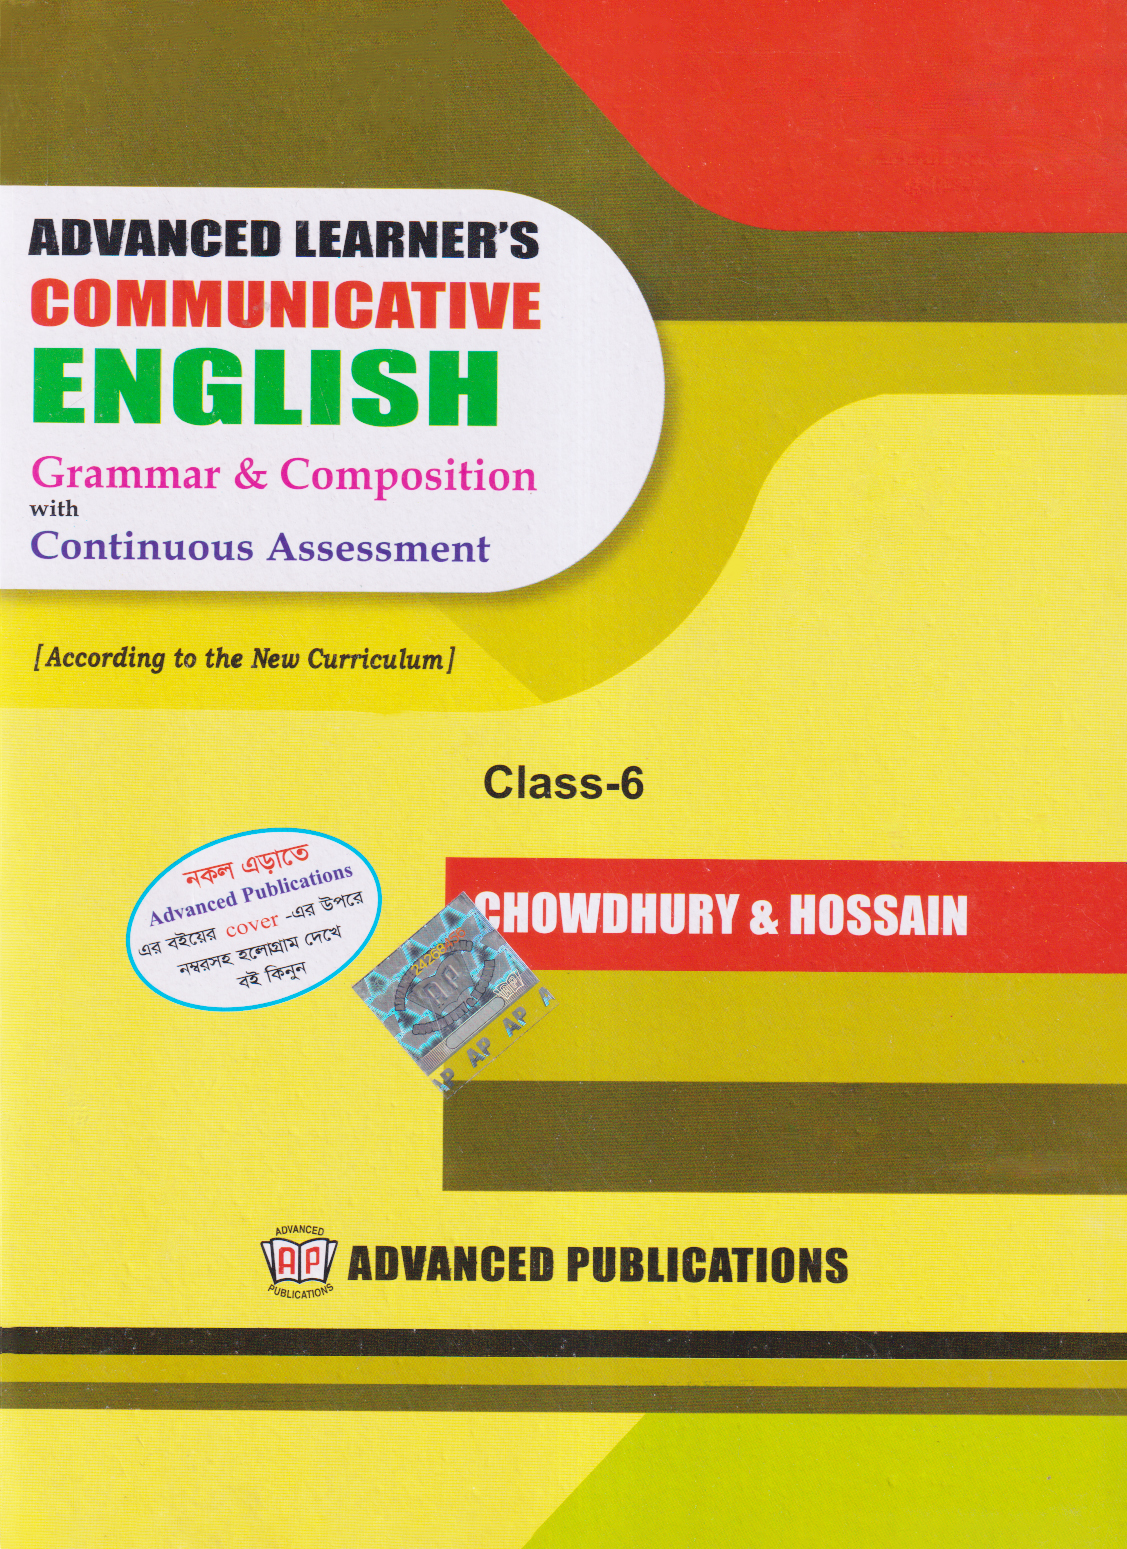 Advanced Learner's Communicative English Grammar & Composition with Continuous Assessment To Solution for Class 6 (পেপারব্যাক)